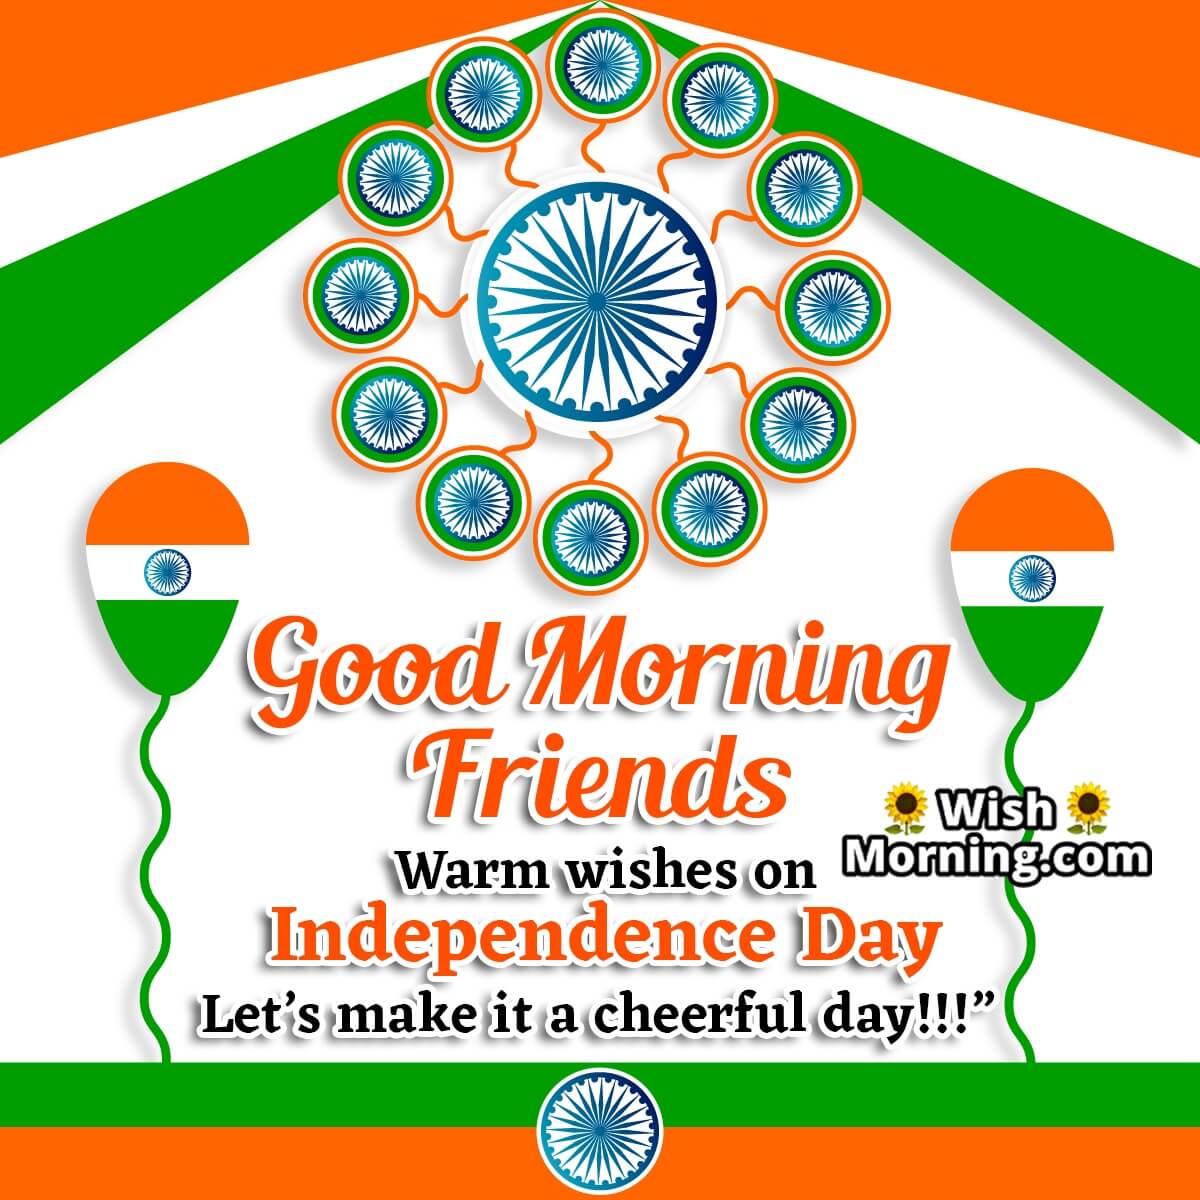 Good Morning Friends Happy Independence Day Wish